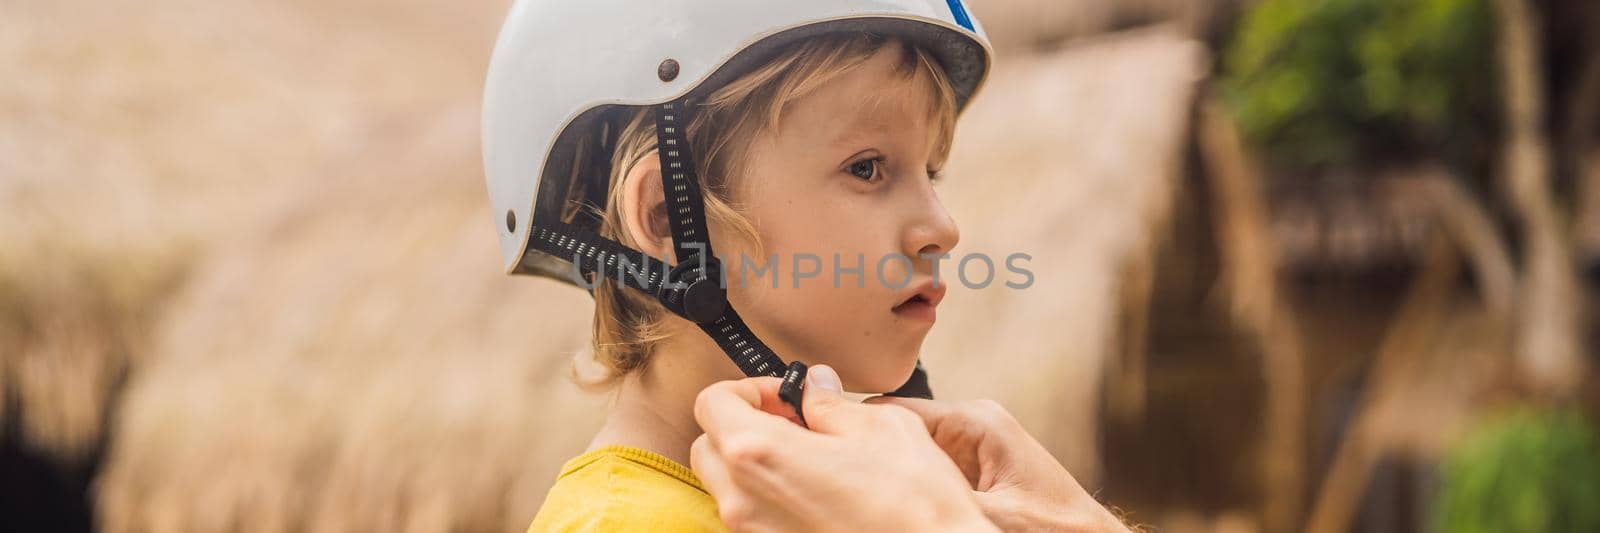 Trainer helps the boy to wear helmet before training skate board. BANNER, LONG FORMAT